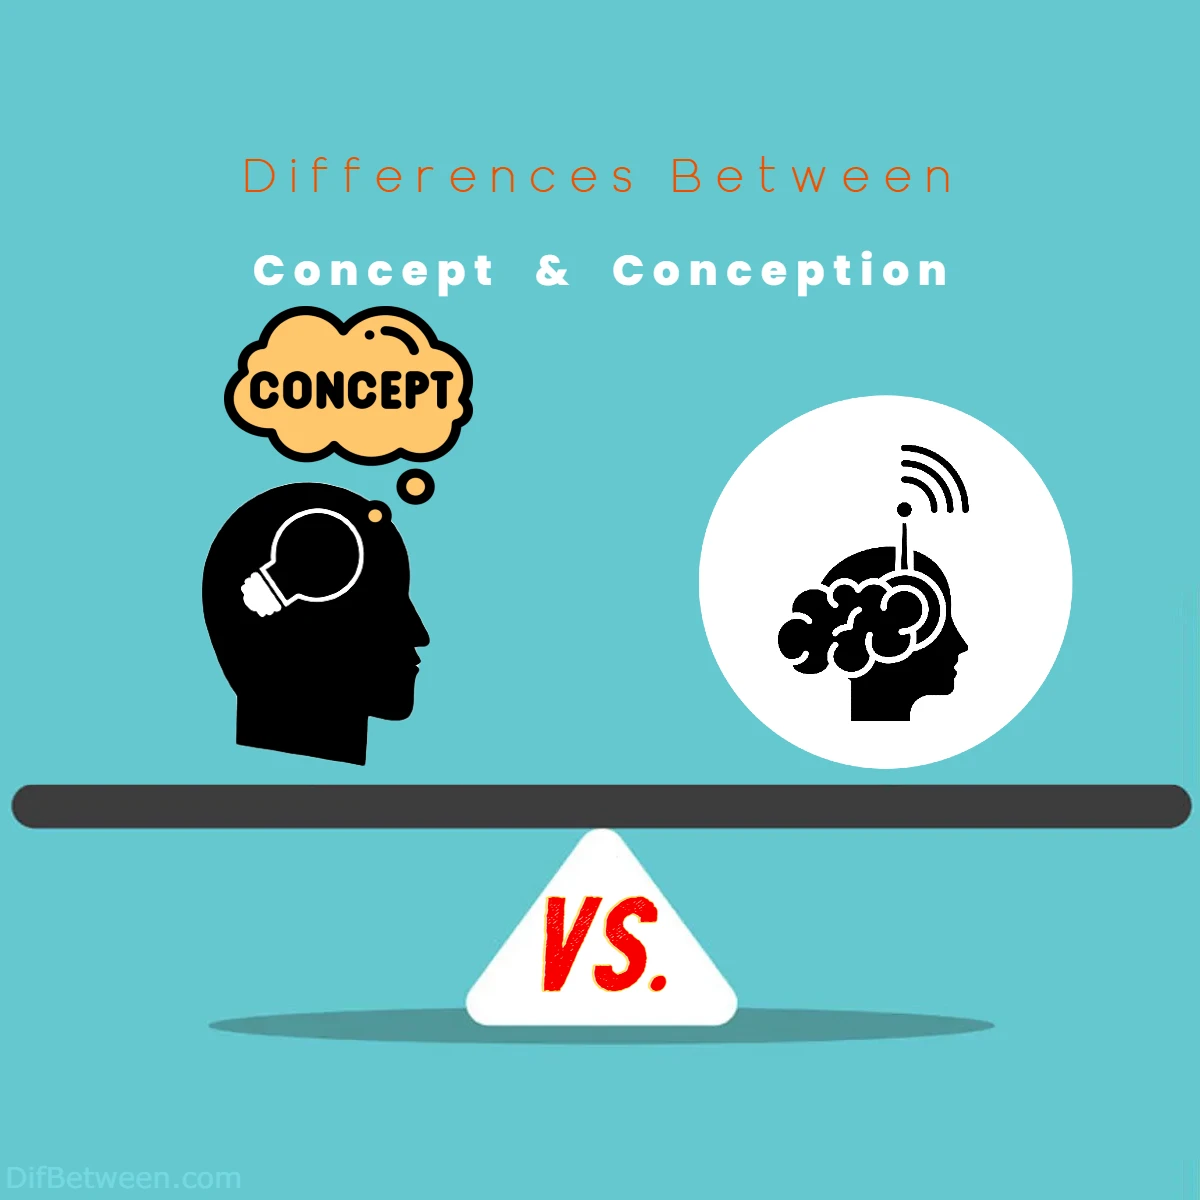 Differences Between Concept vs Conception